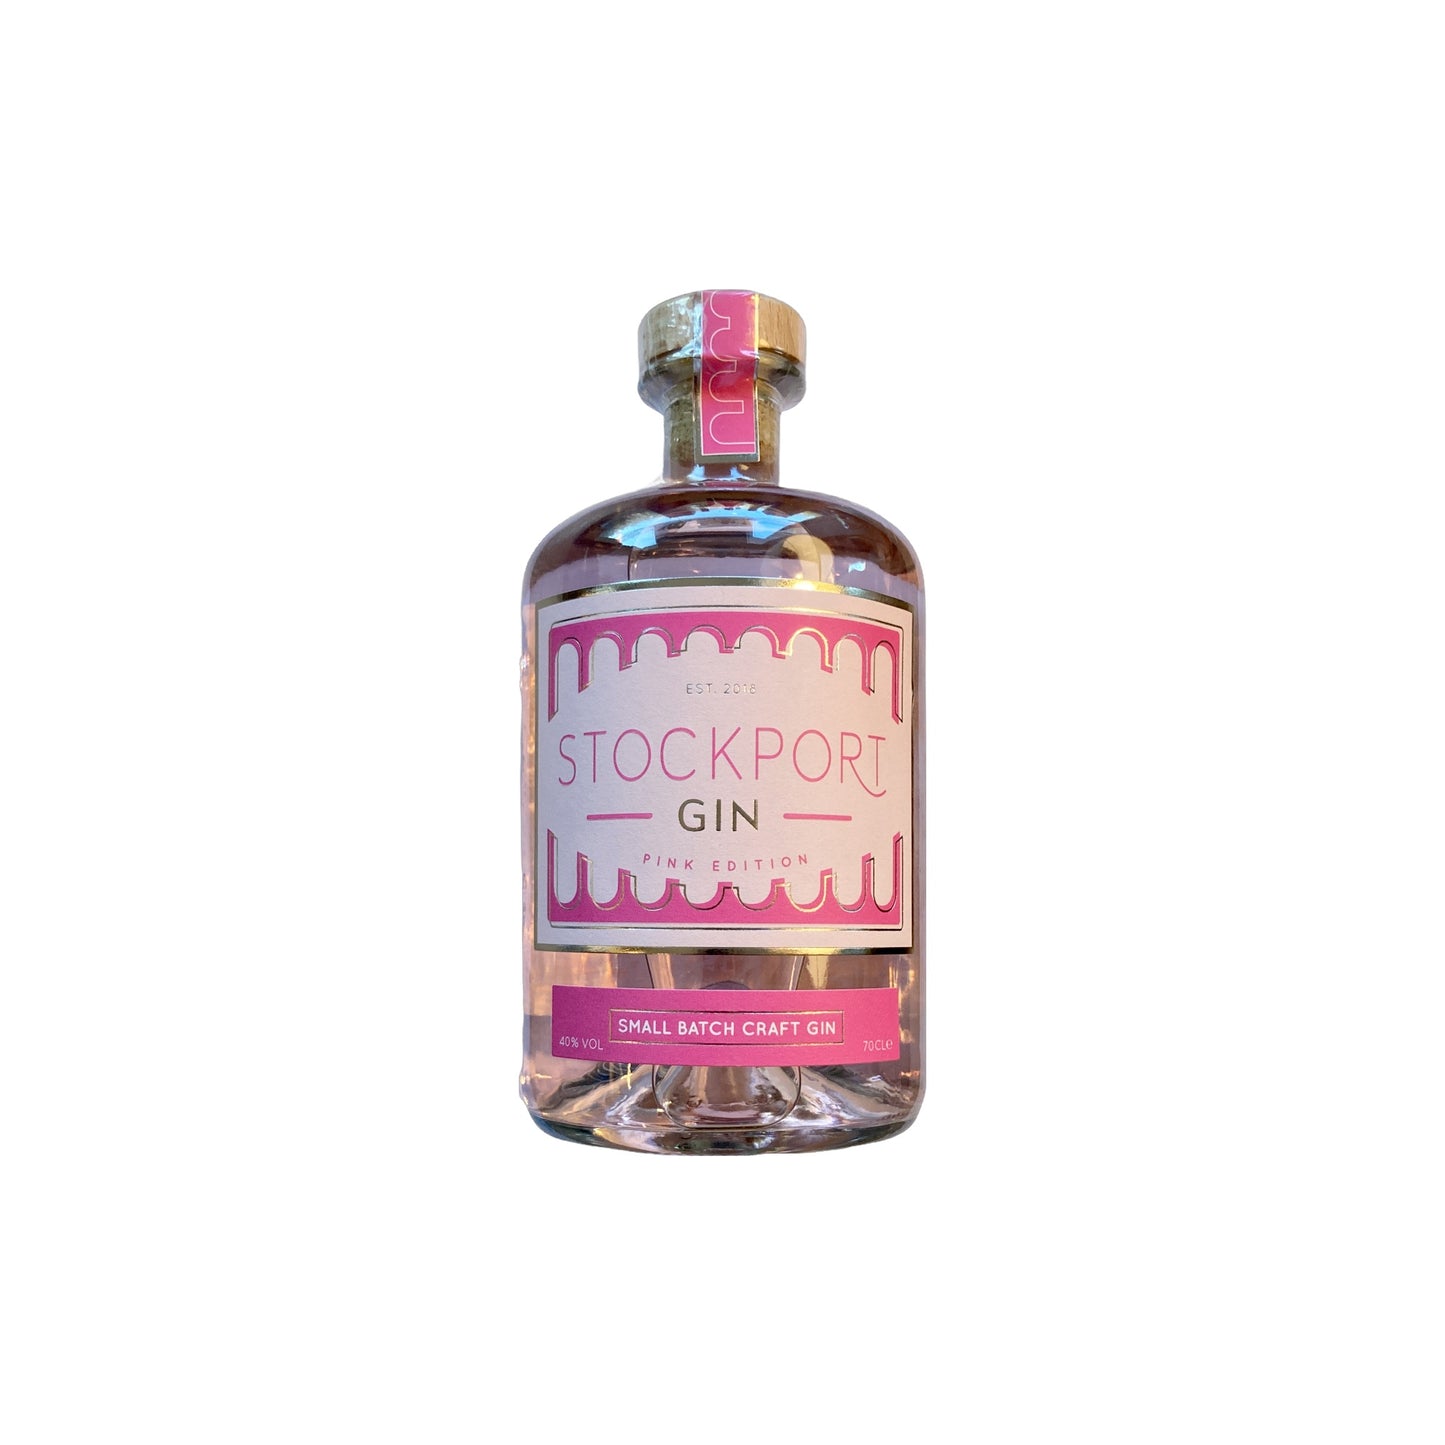 Stockport Gin Pink Edition 700ml / 70cl